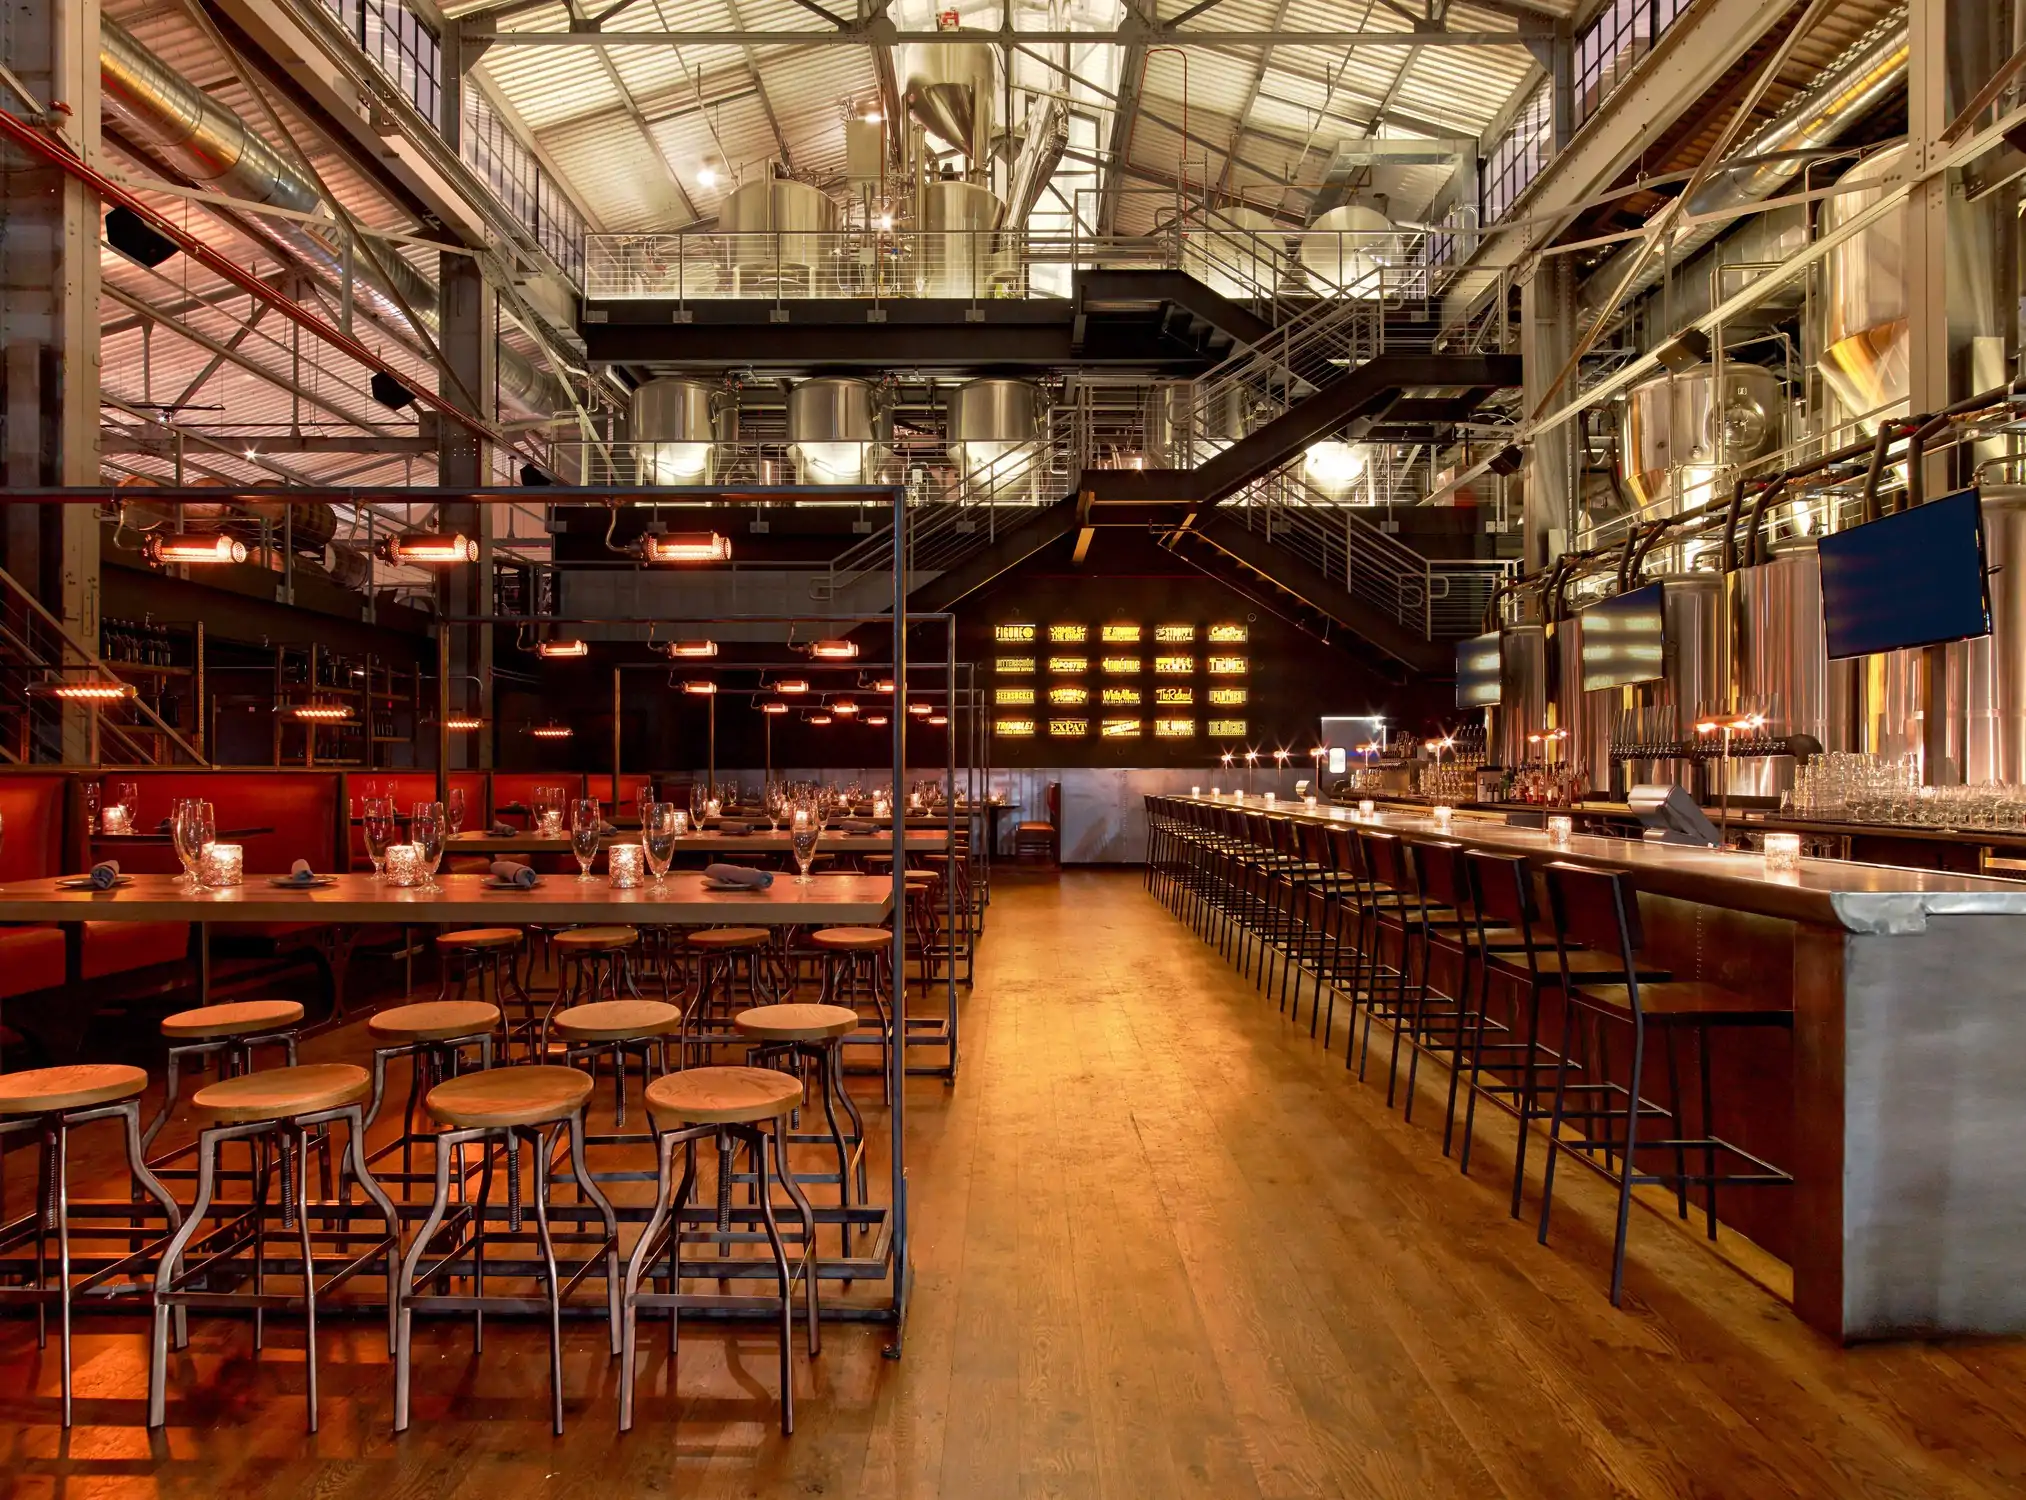 The interior of a brewery with wooden floors and stools, metal tables, shiny brewing equipment and warm lighting.